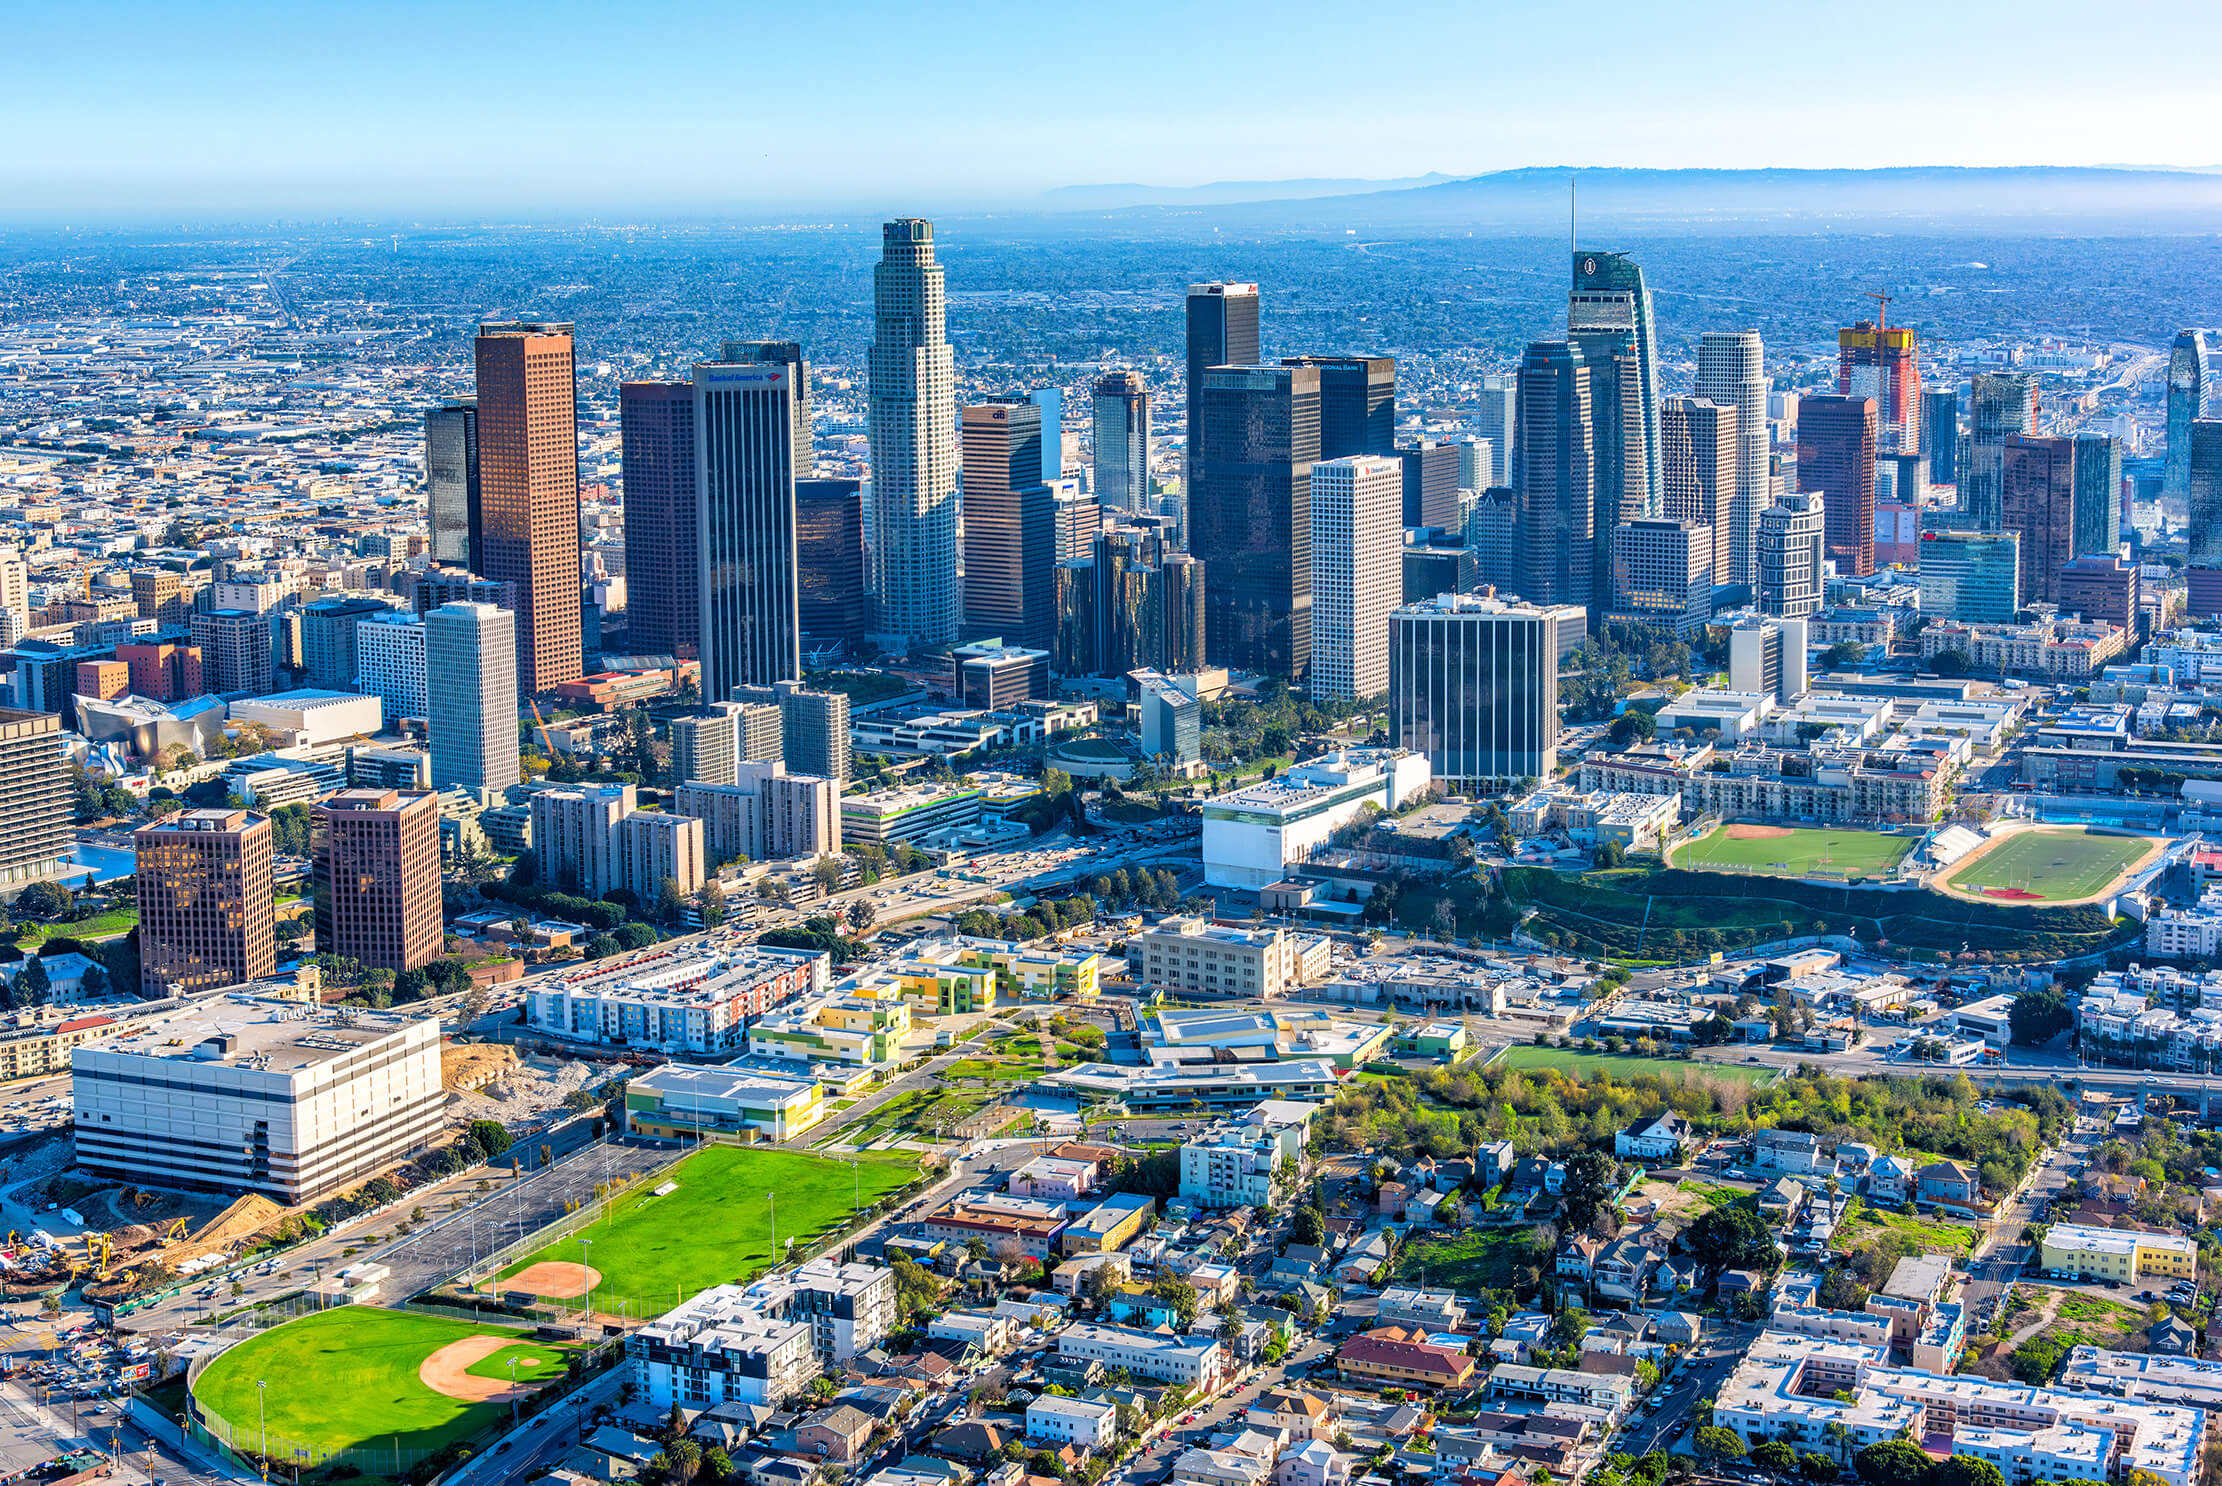 Los Angeles © iStock Photo ID 1815003884 by Art Wager